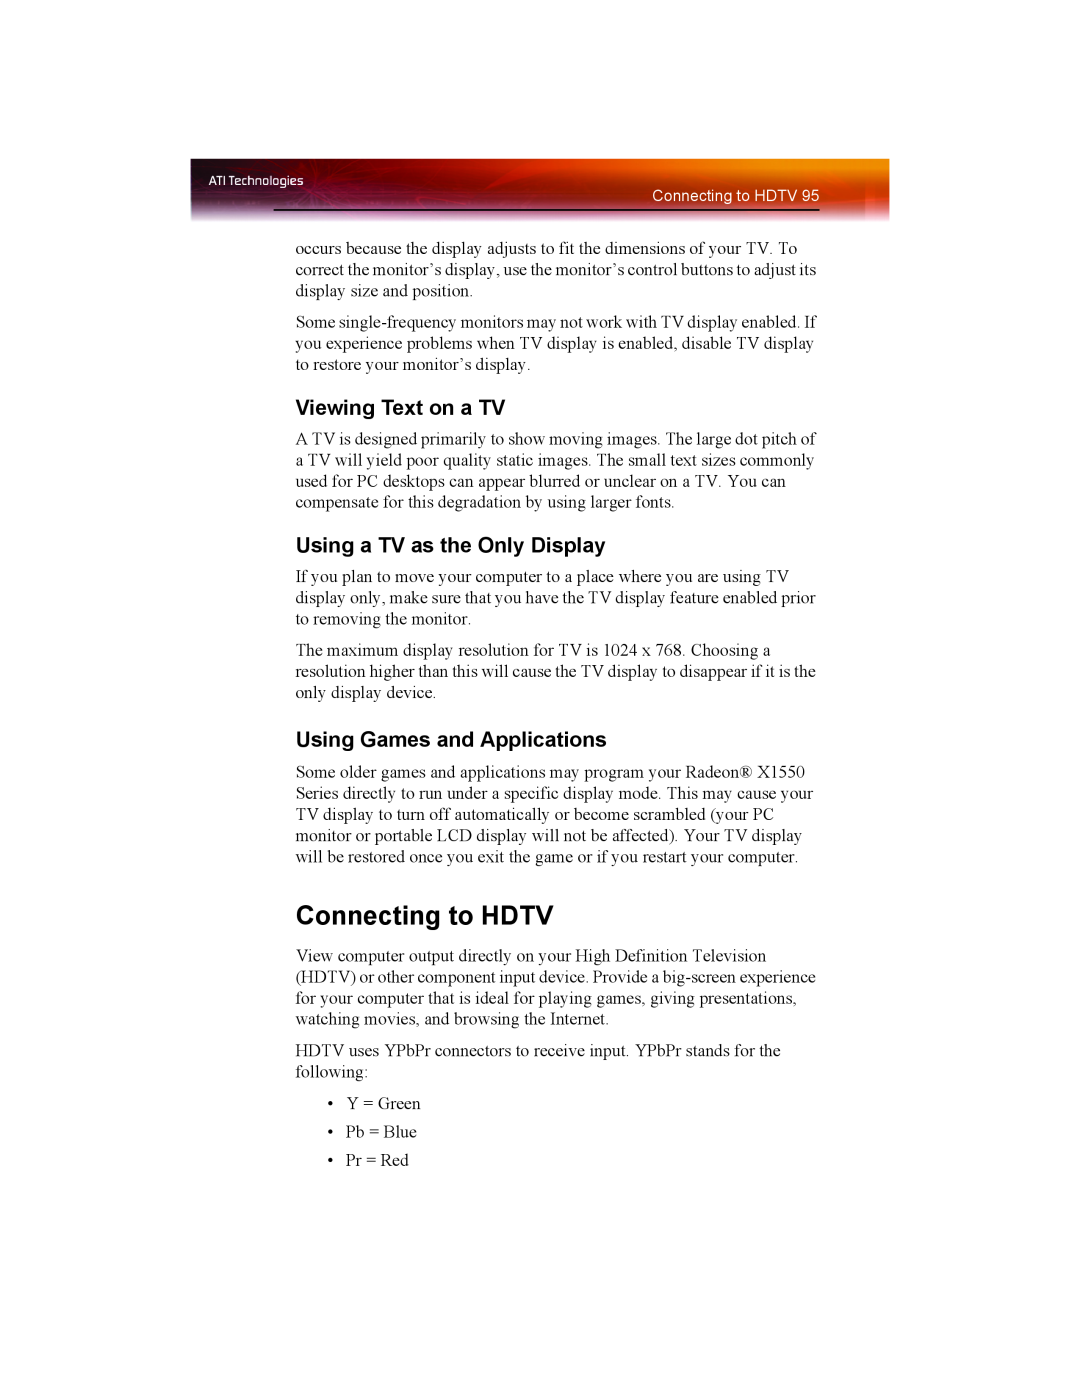 ATI Technologies X1550 SERIES manual Connecting to HDTV, Viewing Text on a TV, Using a TV as the Only Display 